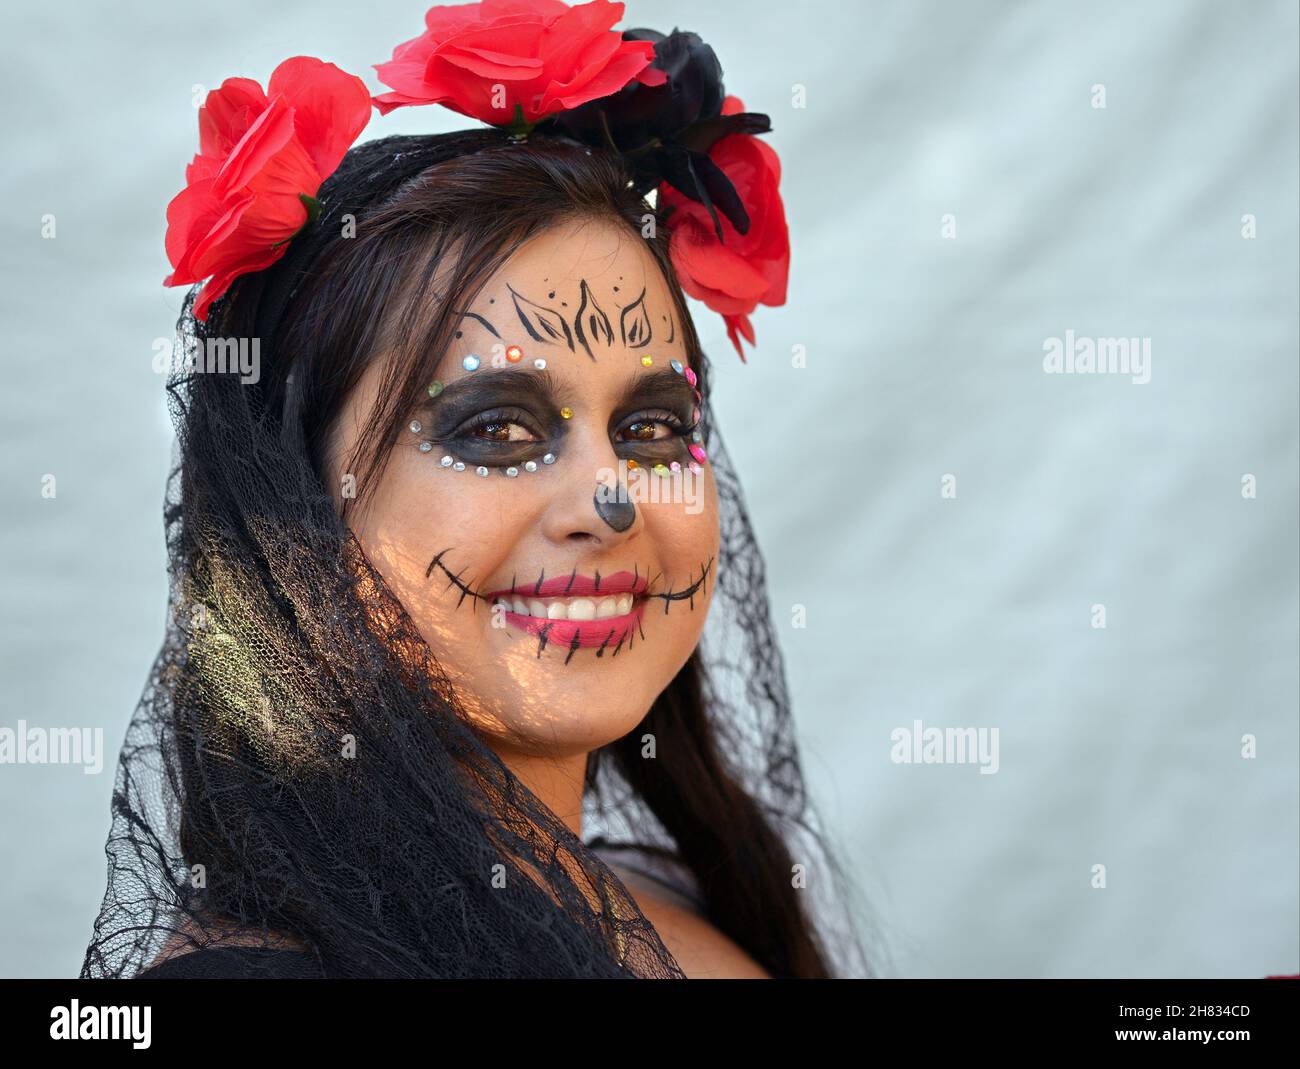 Cheerful positive optimistic young Mexican Yucatecan woman with traditional Catrina face makeup and glitter face jewels smiles on the Day of the Dead. Stock Photo